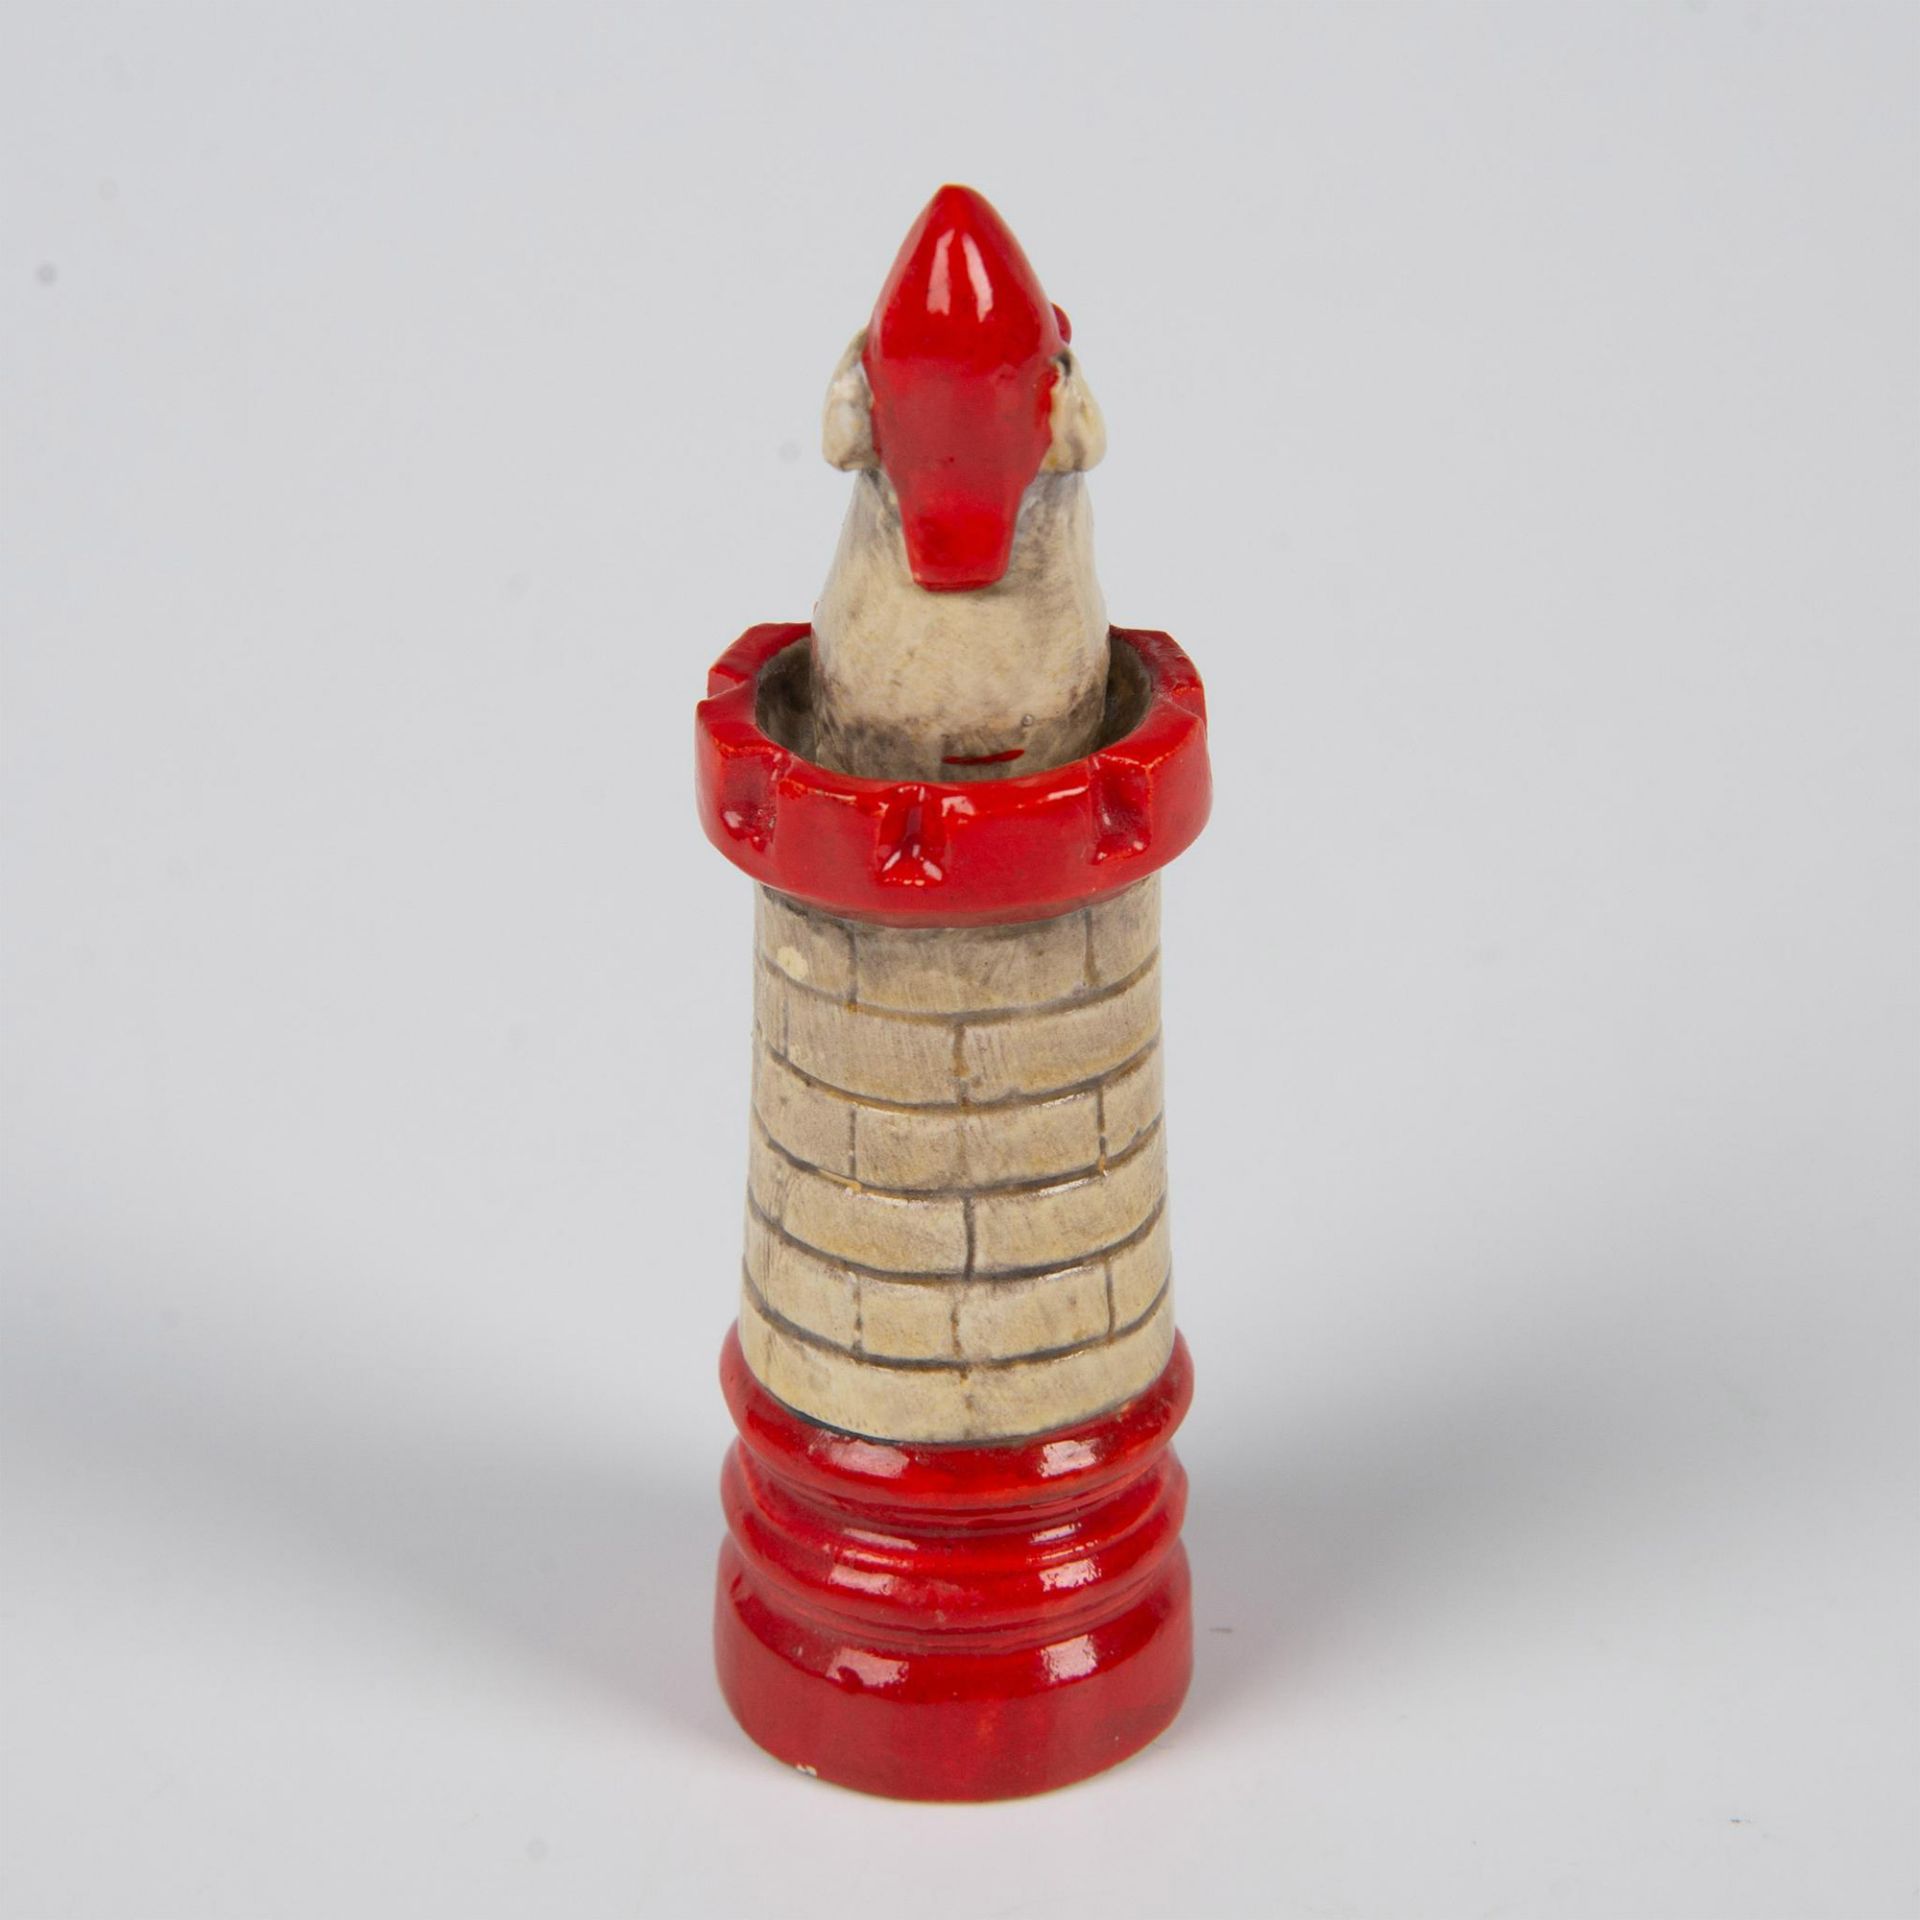 Doulton Lambeth George Tinworth Chess Piece, Rook - Image 3 of 6